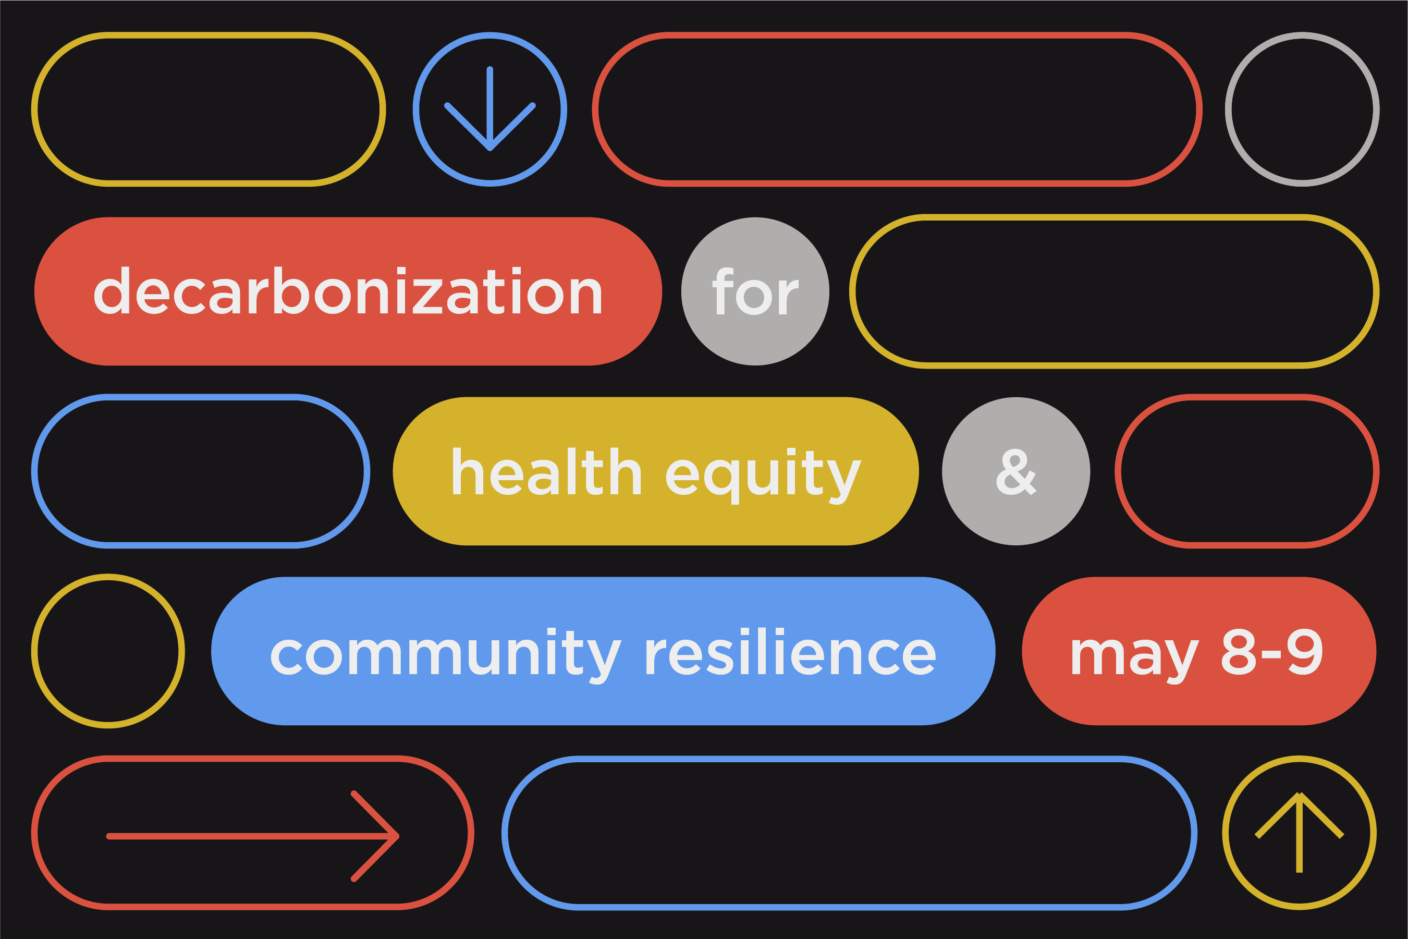 The increased urgency of our climate crisis and global health emergencies demand responses that recognize decarbonization is directly correlated to health equity and community resilience.